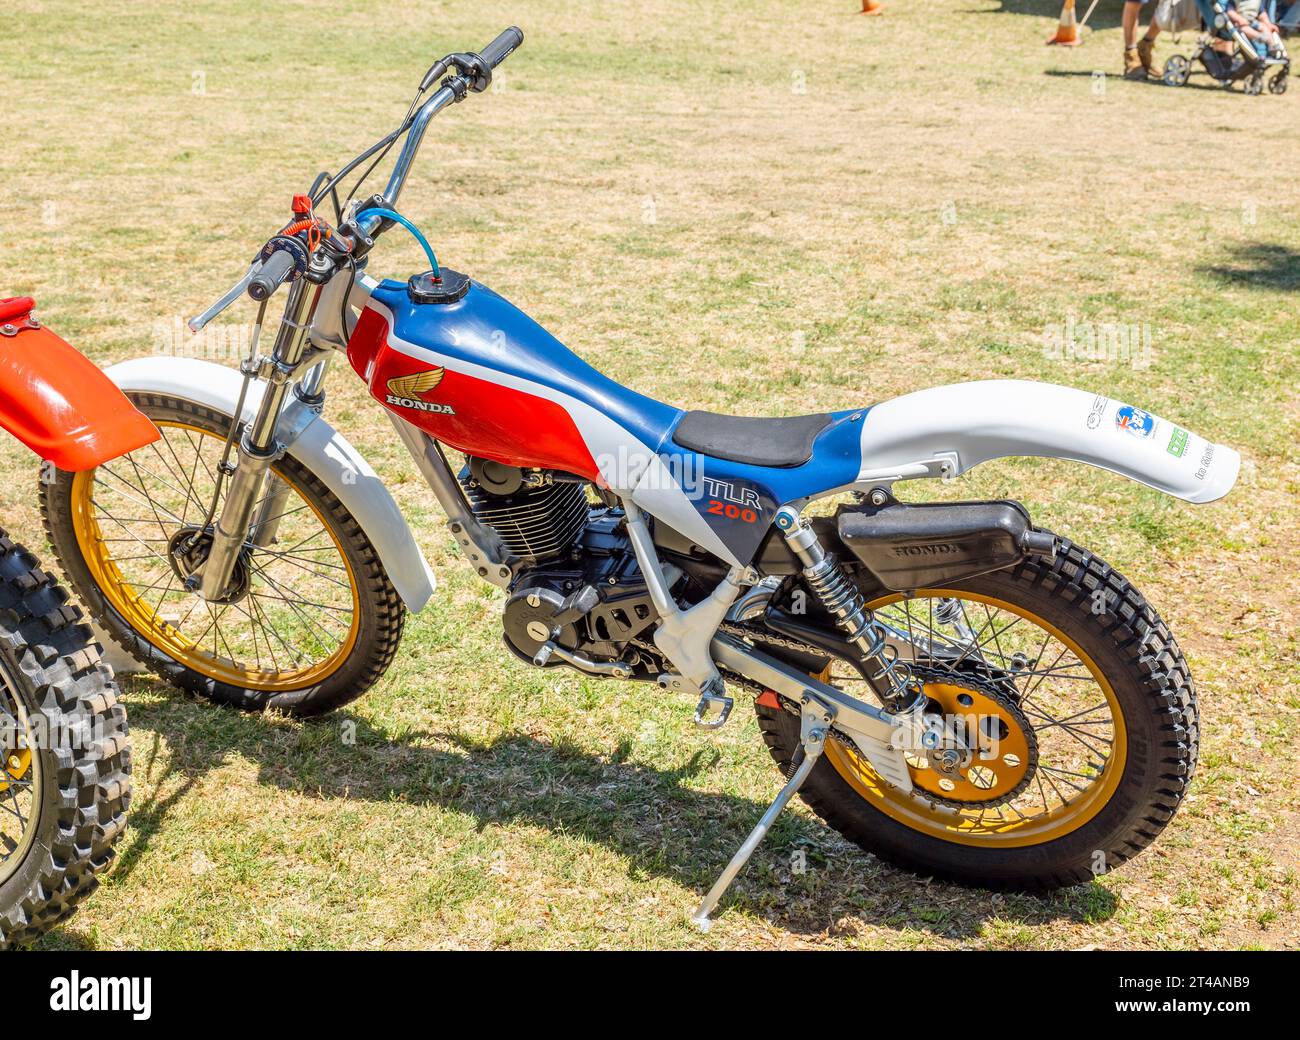 The Honda Reflex (TLR200) is a dual purpose trials motorcycle sold through 1986 to 1987, this restored bike is on show at Glen Innes, northern NSW Stock Photo